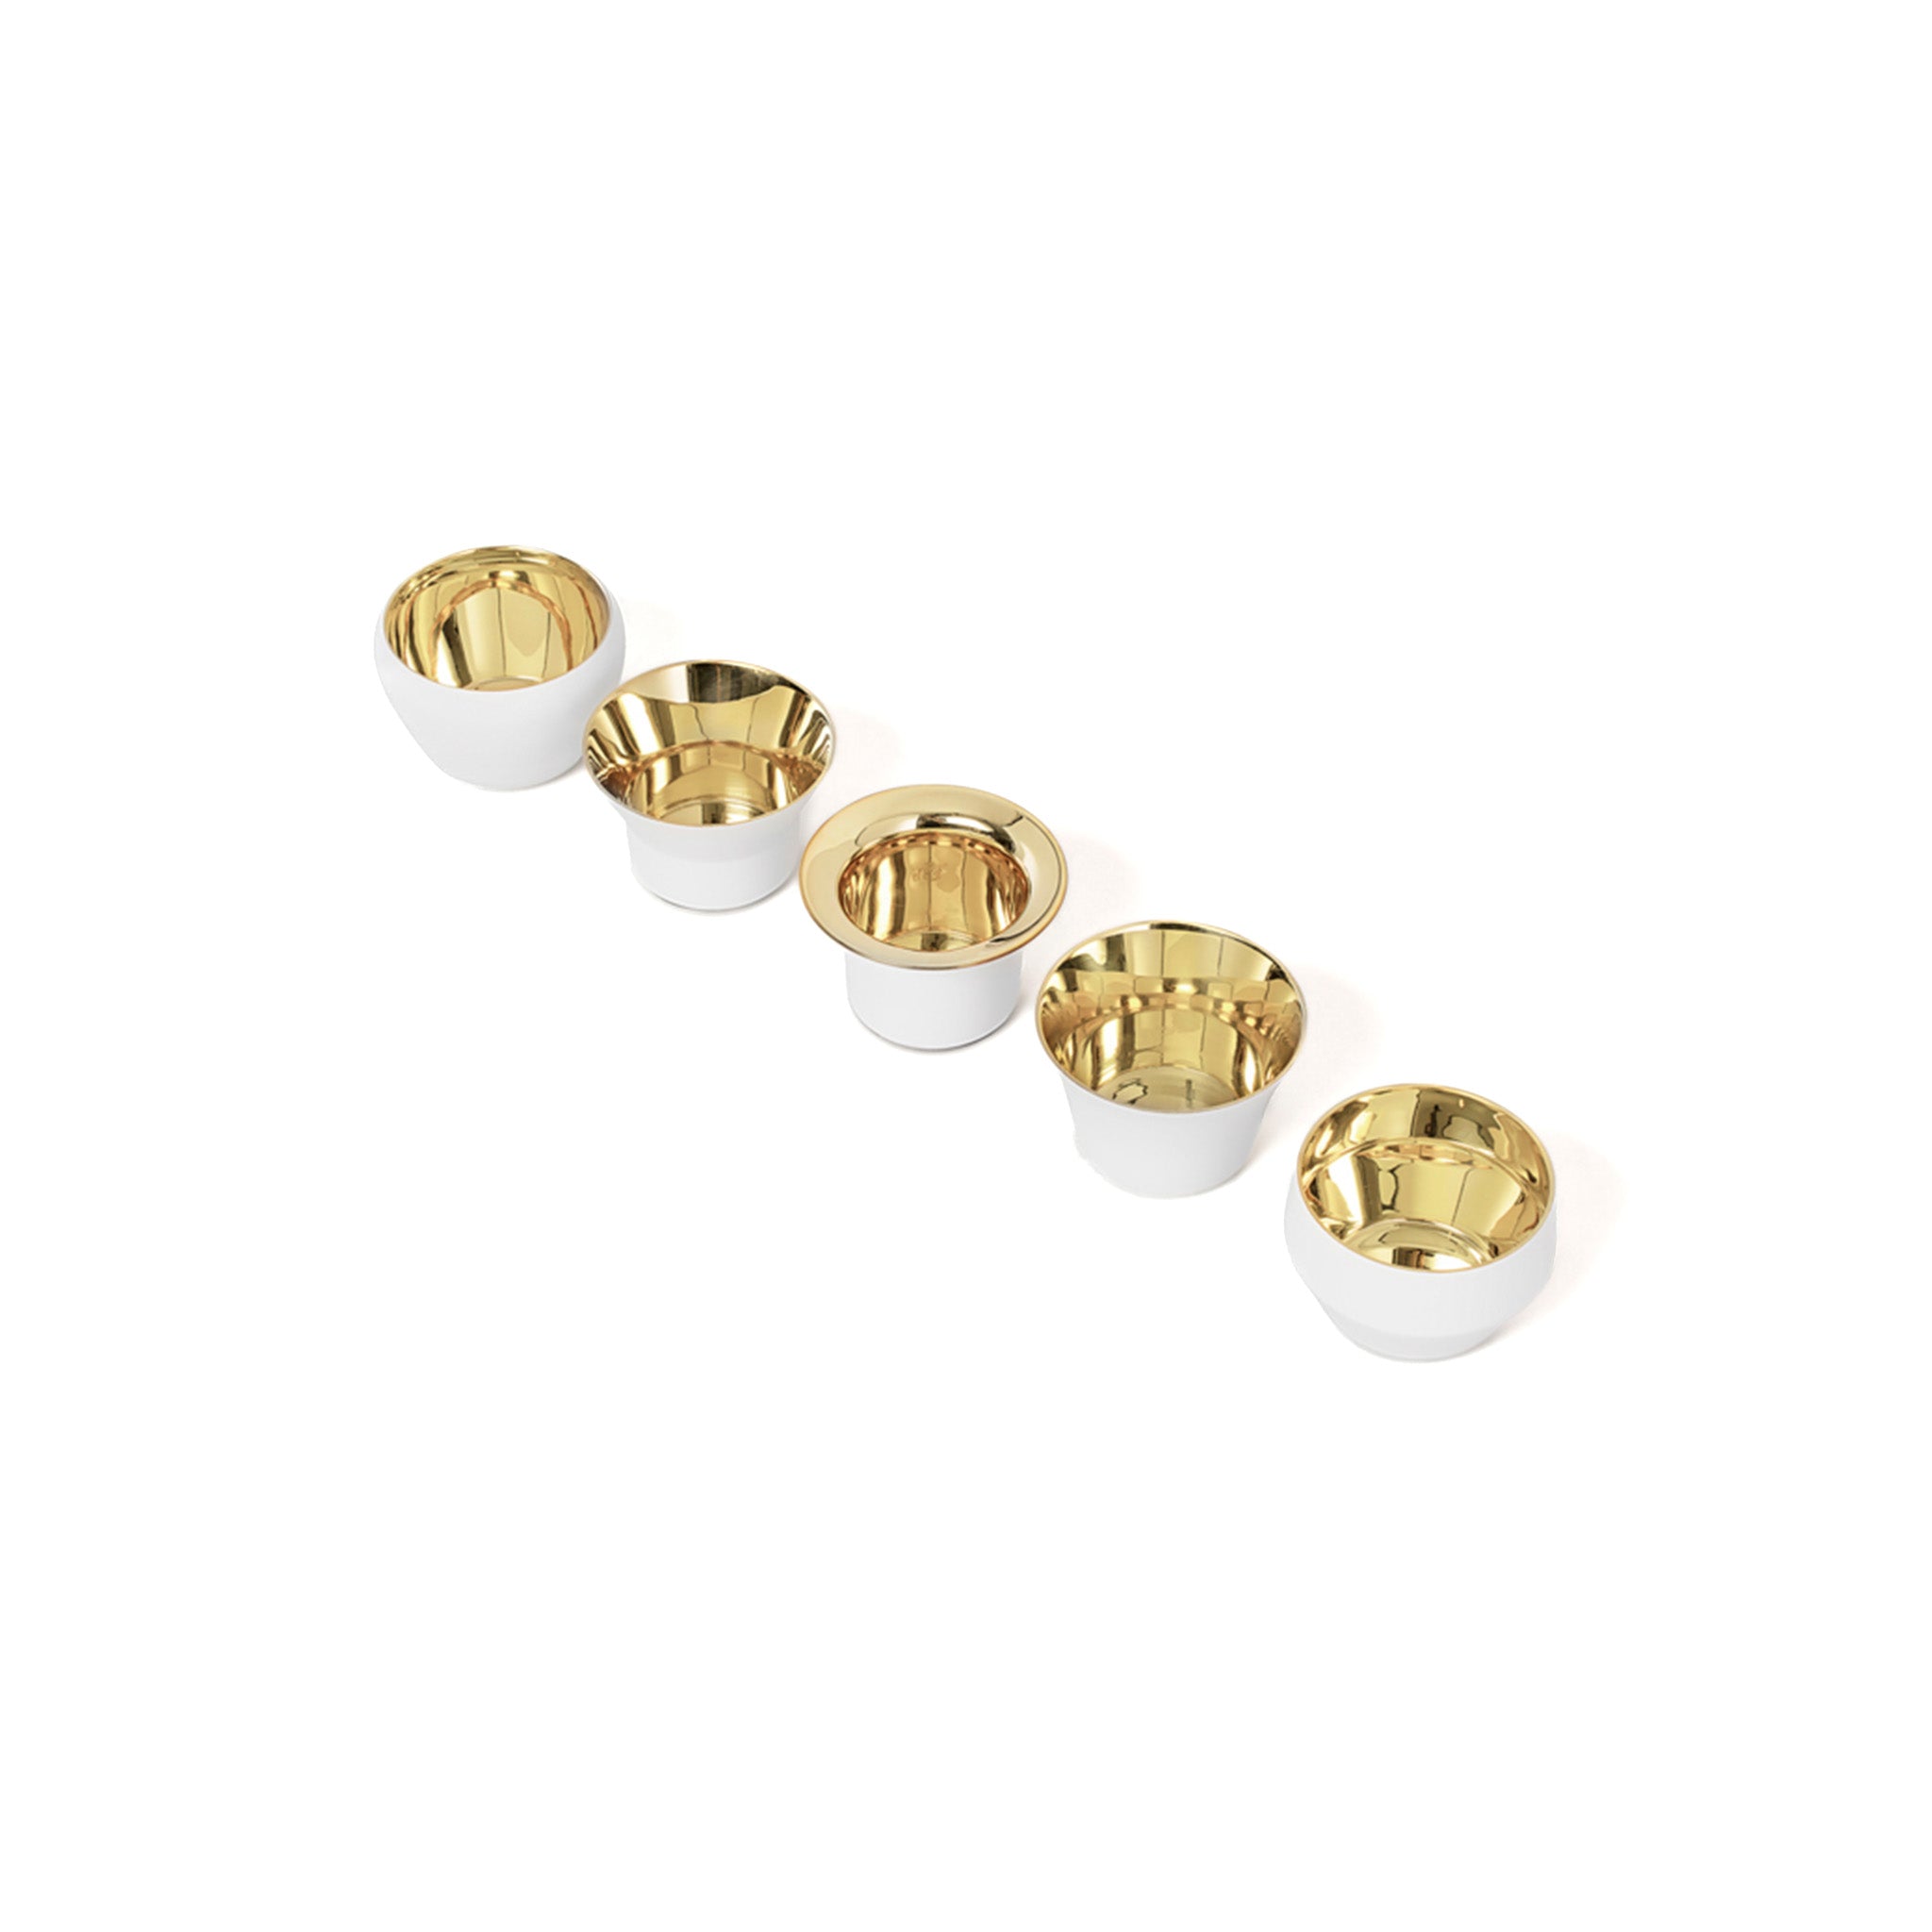 a set of five white and brass tealights by skultuna at a diagonal on a white background